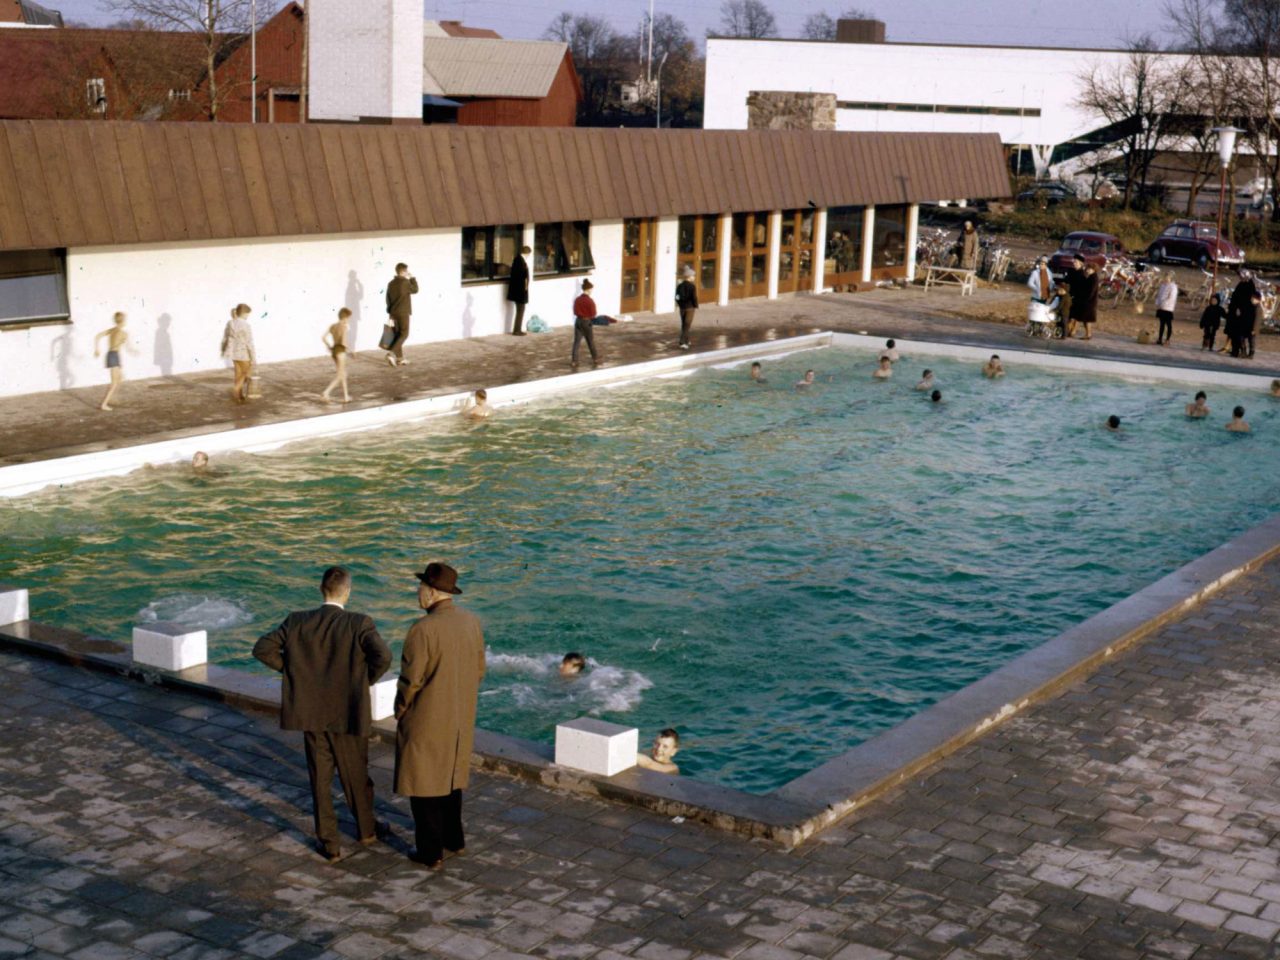 Image from above of swimming pool in autumn weather, two warmly dressed men in the foreground looking at children bathing.